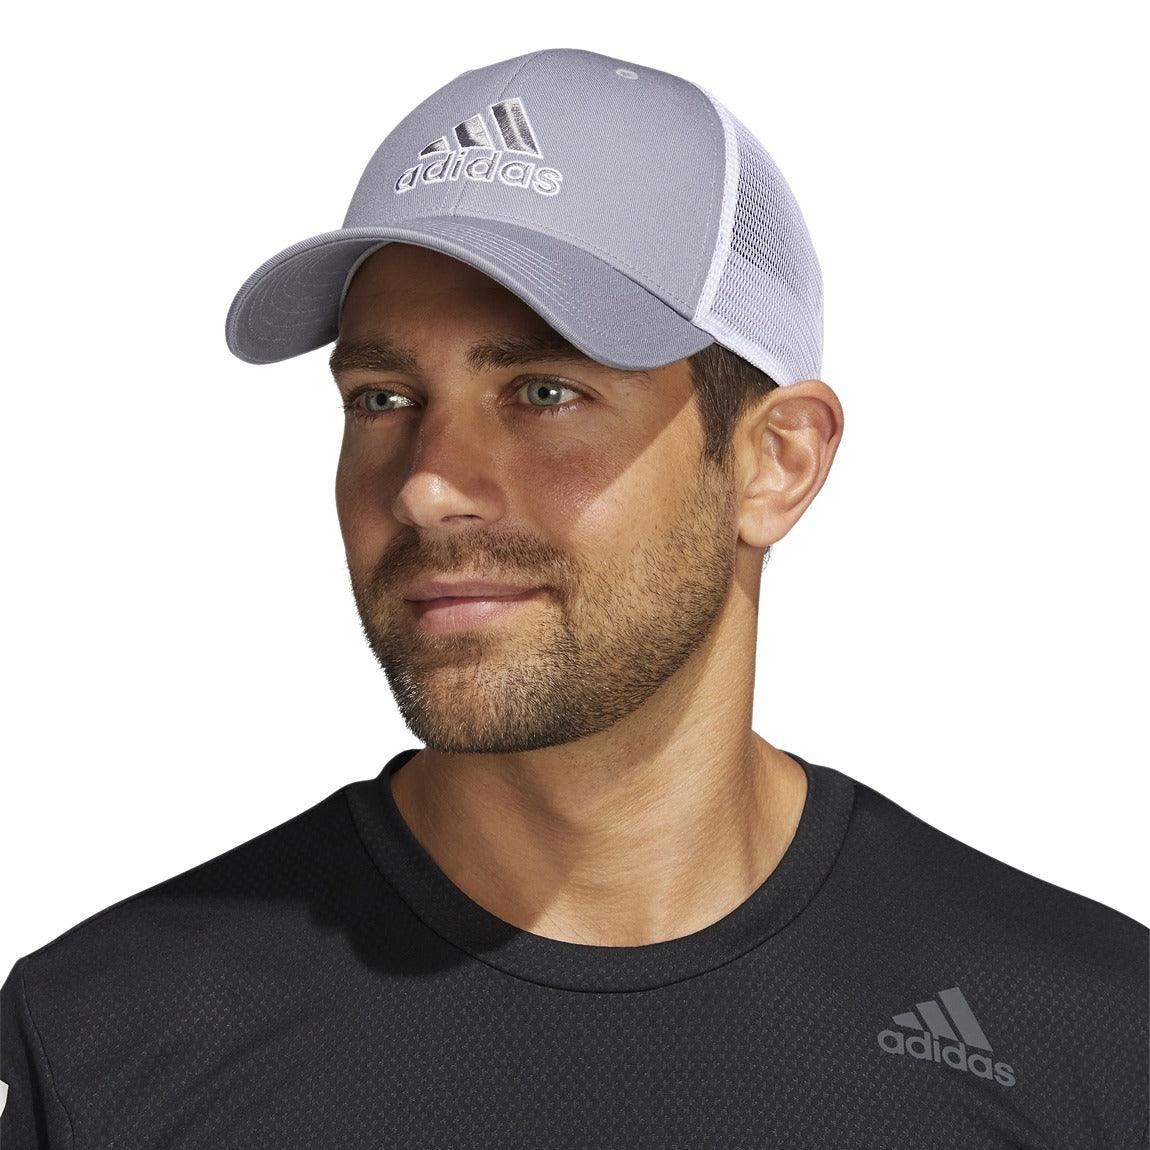 Structured Mesh Snapback Cap - Men - Sports Excellence